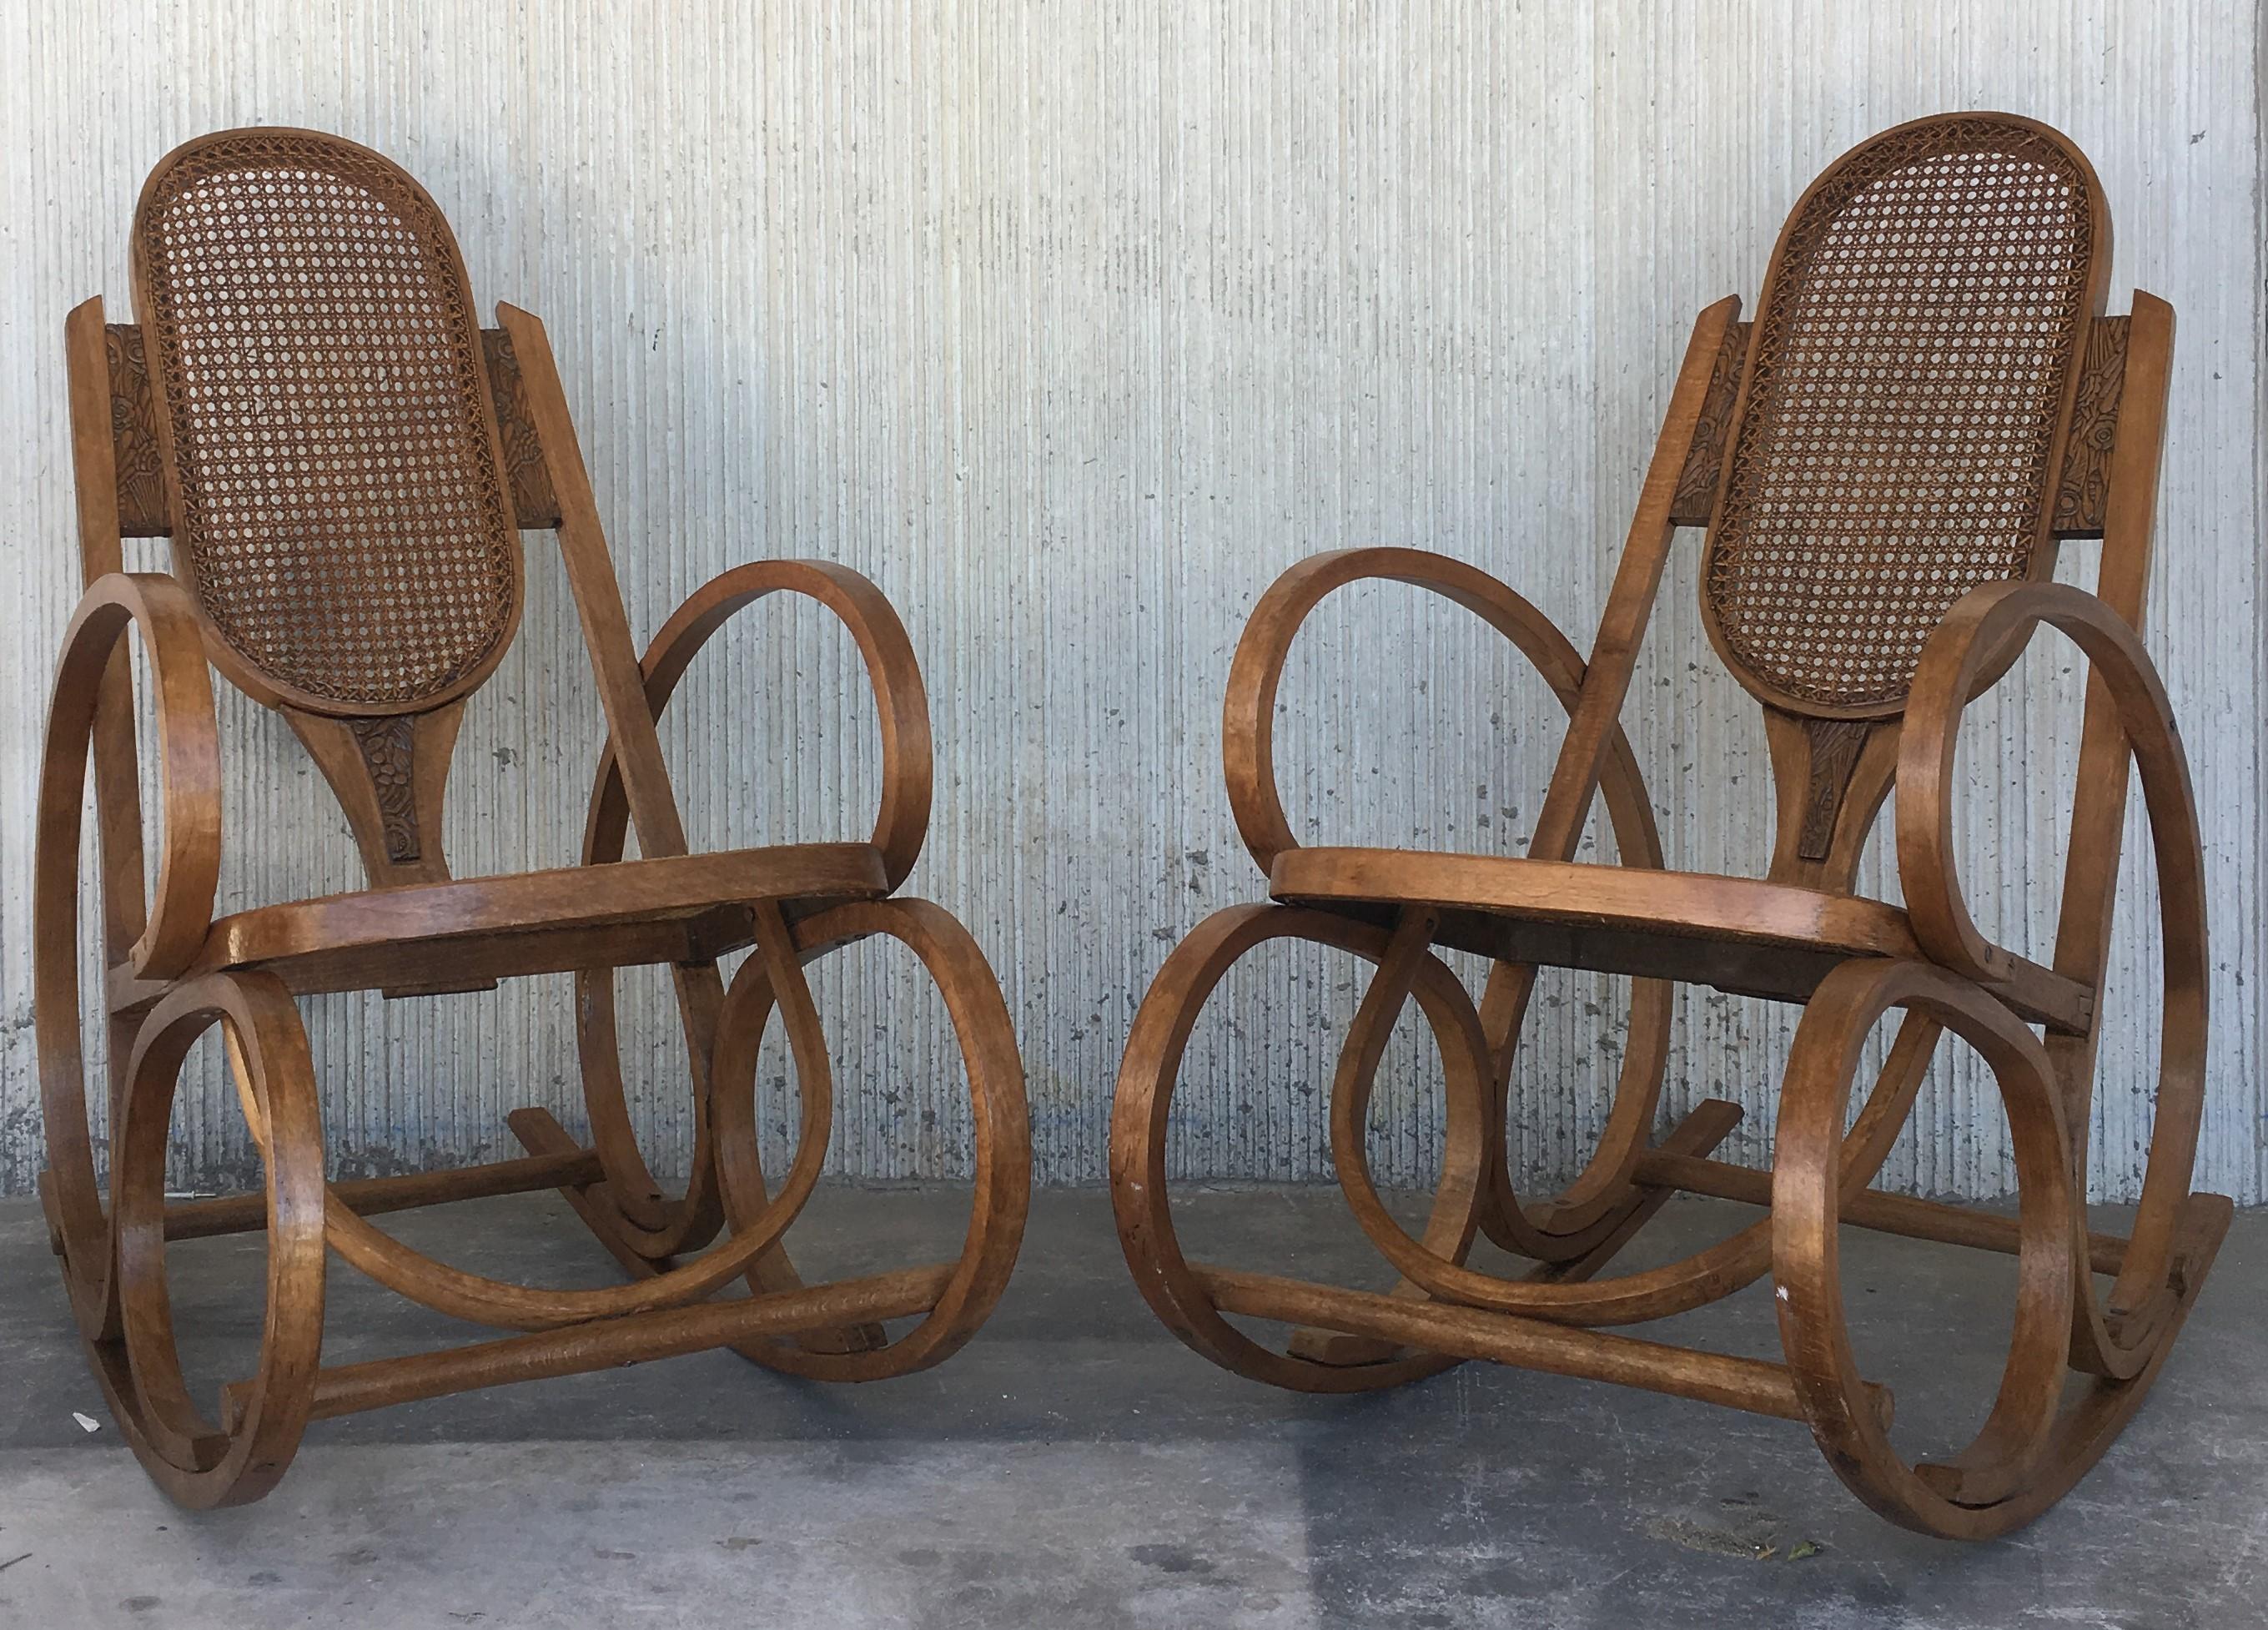 20th Century Stunning Art Deco Bentwood And Reed Seats Rocking